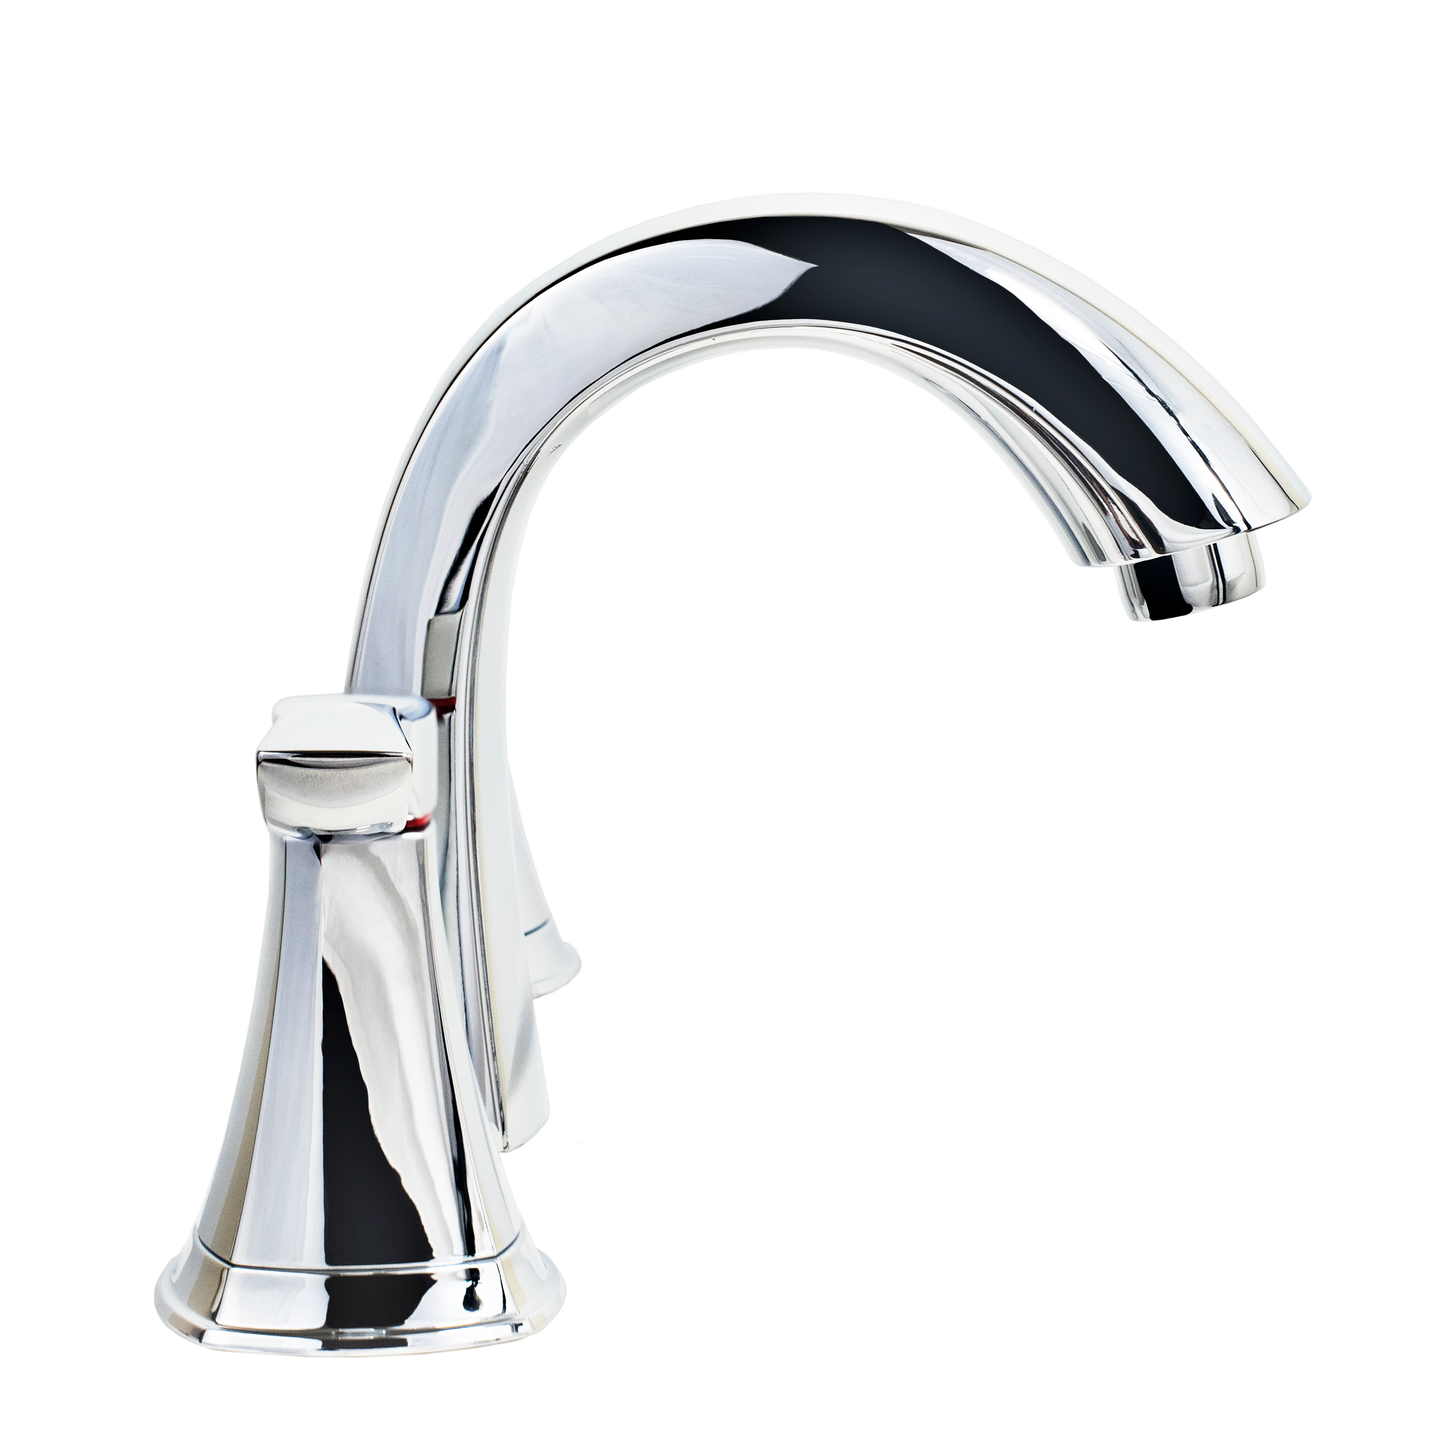 2-H 8" Widespread Bathroom Faucet With Pop-Up, Chrome